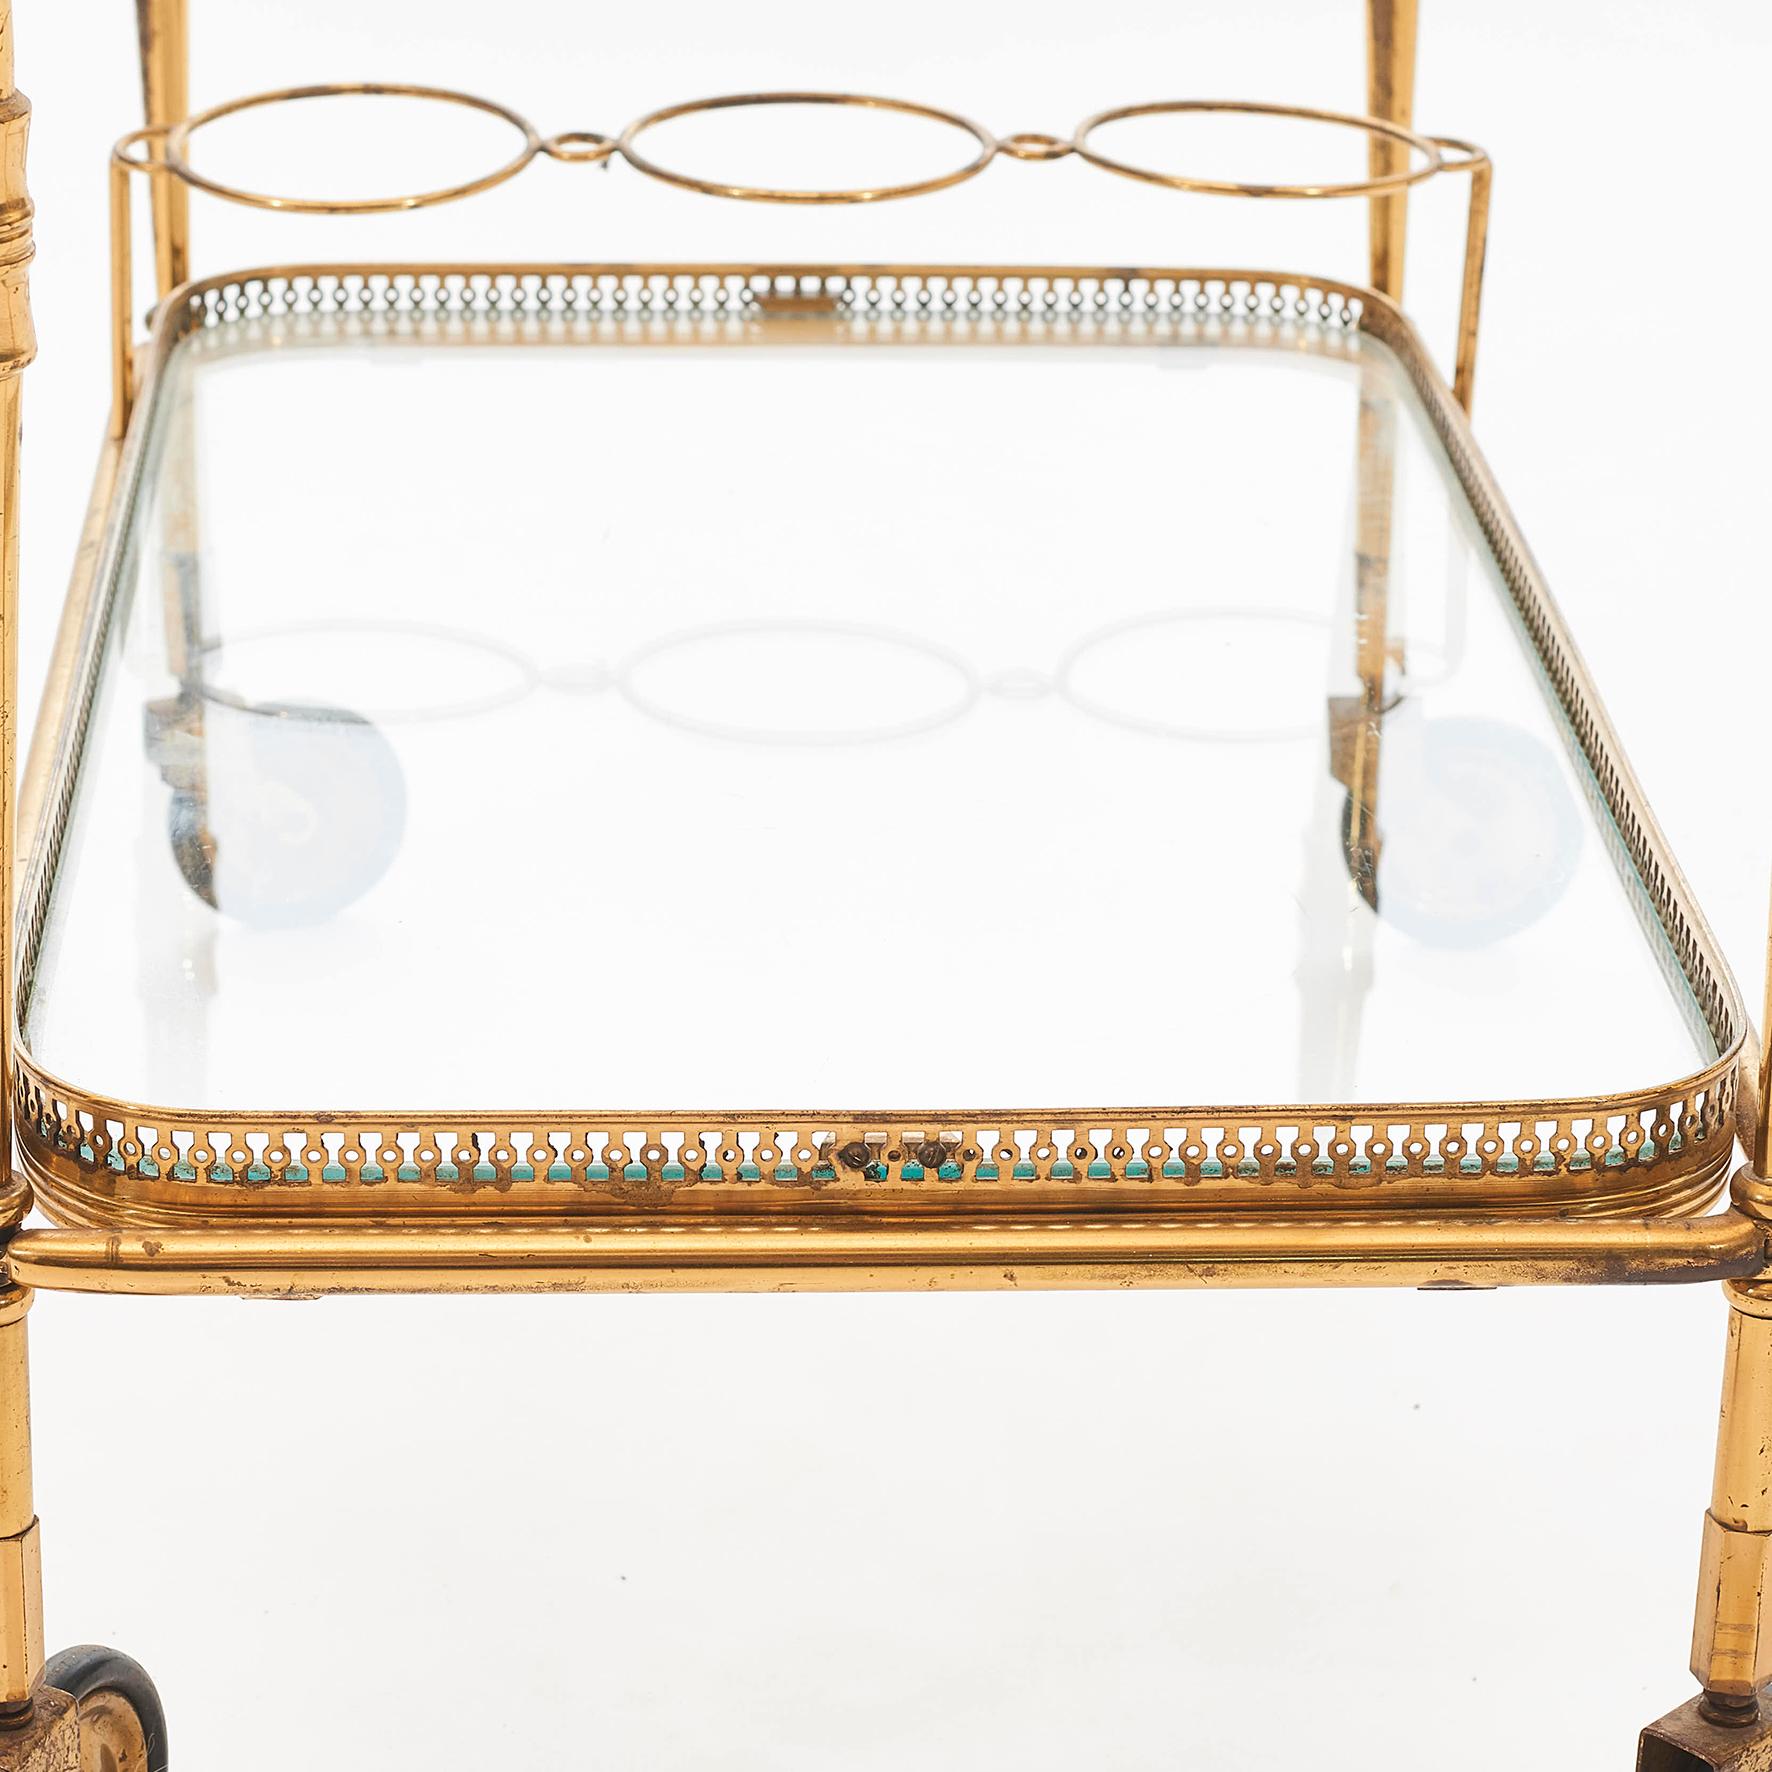 20th Century French Art Deco Bar Cart or Tea Trolley in Brass with Glass Trays